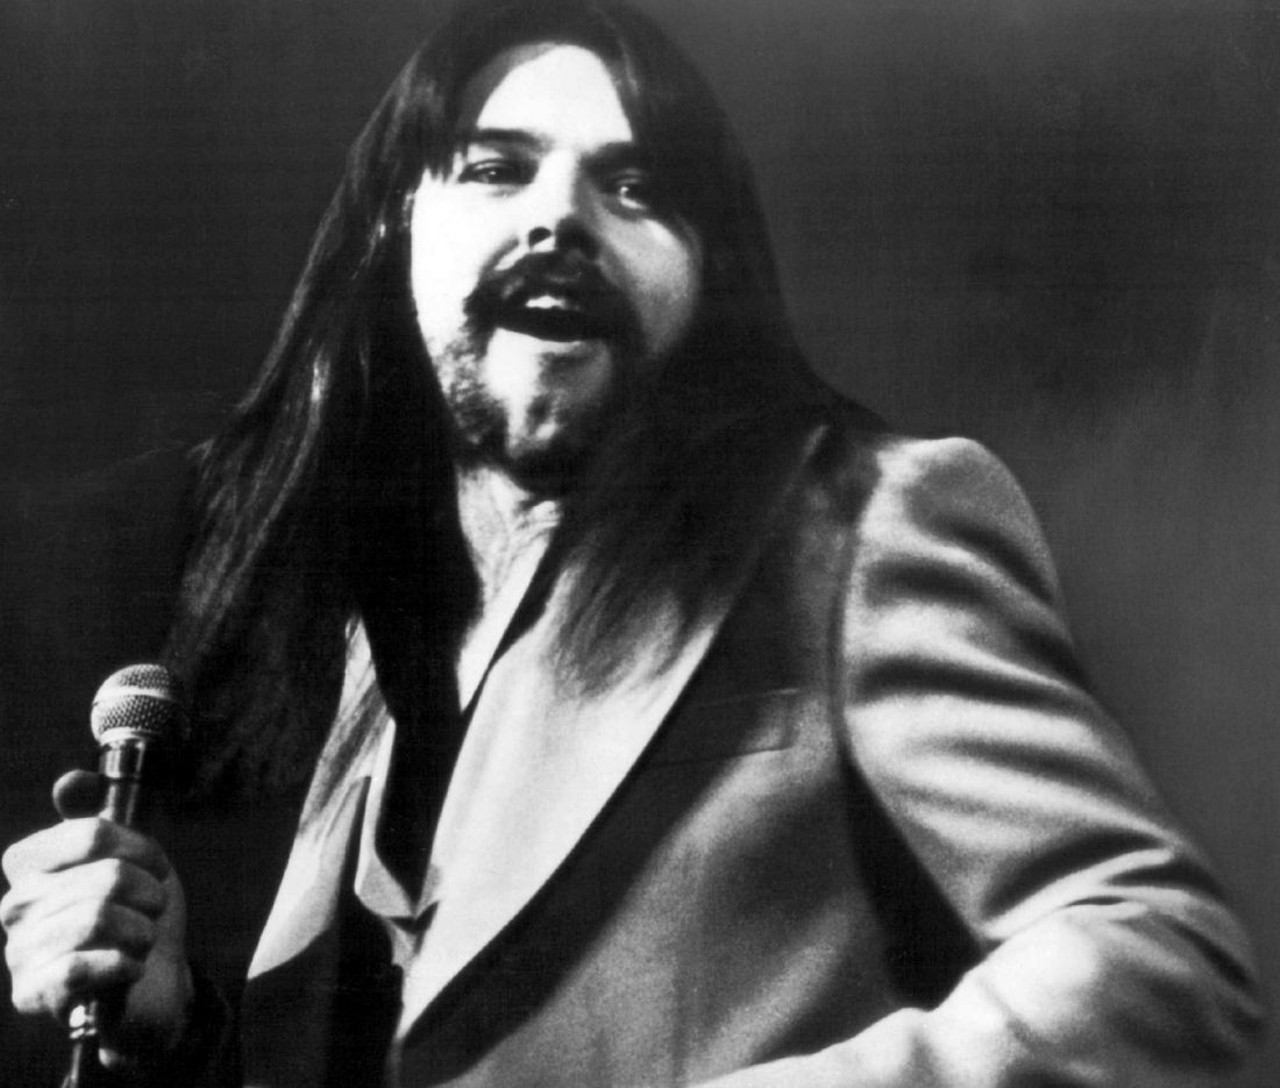 Bob Seger at Cobo Hall
September 4-5, 1975
Bob Seger&#146;s epic album Live Bullet was recorded at Cobo Hall during this pair of 1975 concerts. In an era where live rock albums were all the rage, Seger&#146;s live renditions of his greatest hits helped turn the page from Detroit rocker to mainstream national rock icon. The album stands the test of time as one of the best live rock albums ever and it&#146;s only natural that it took place in Seger&#146;s hometown.
Photo from Wikimedia Commons, public domain